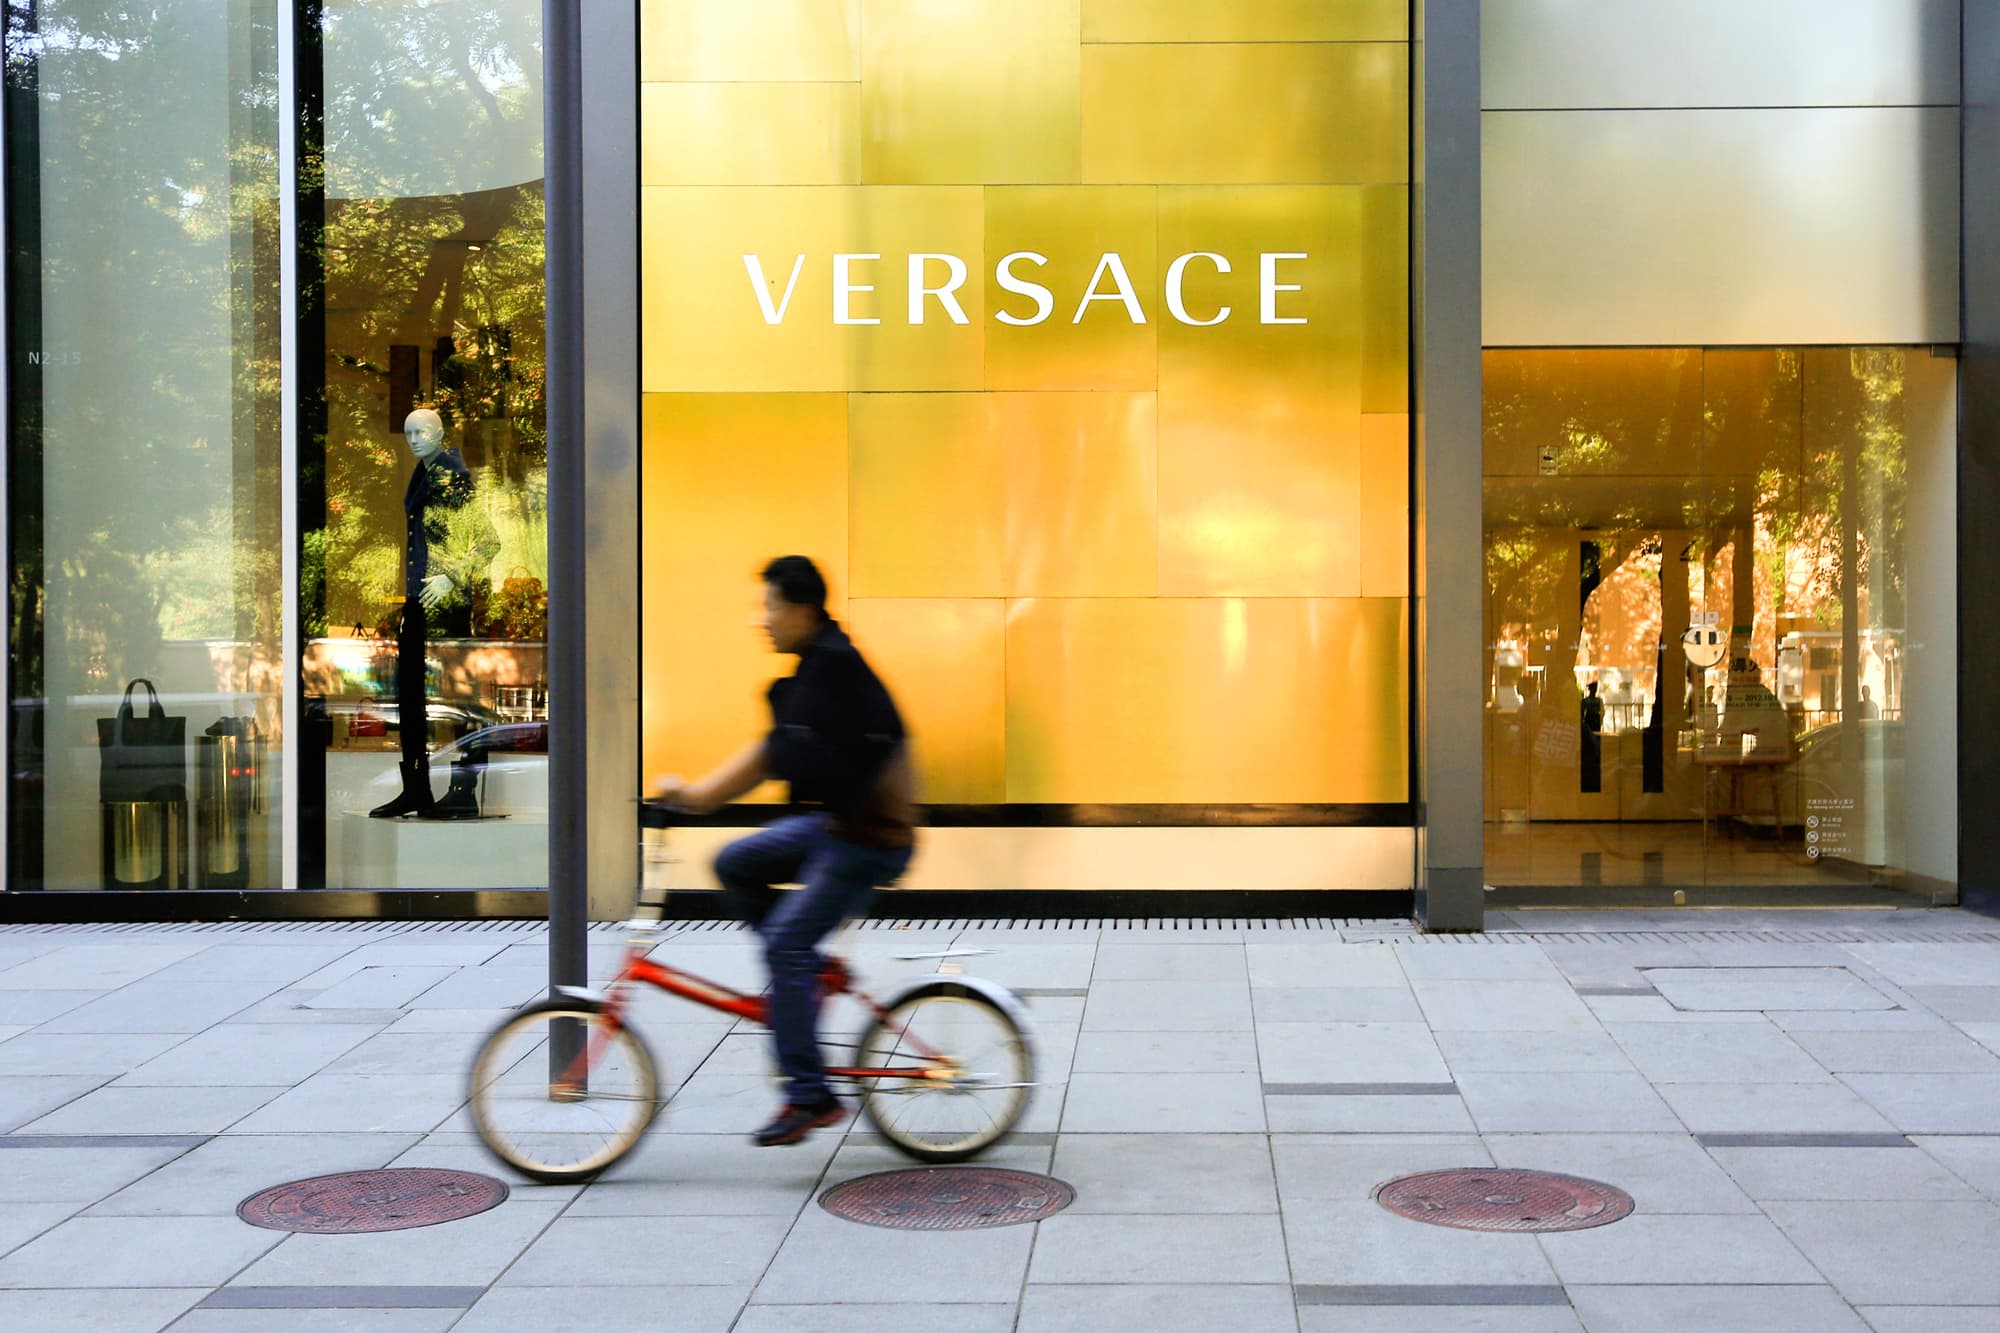 Michael Kors has a new name, Capri, and now owns both Versace and